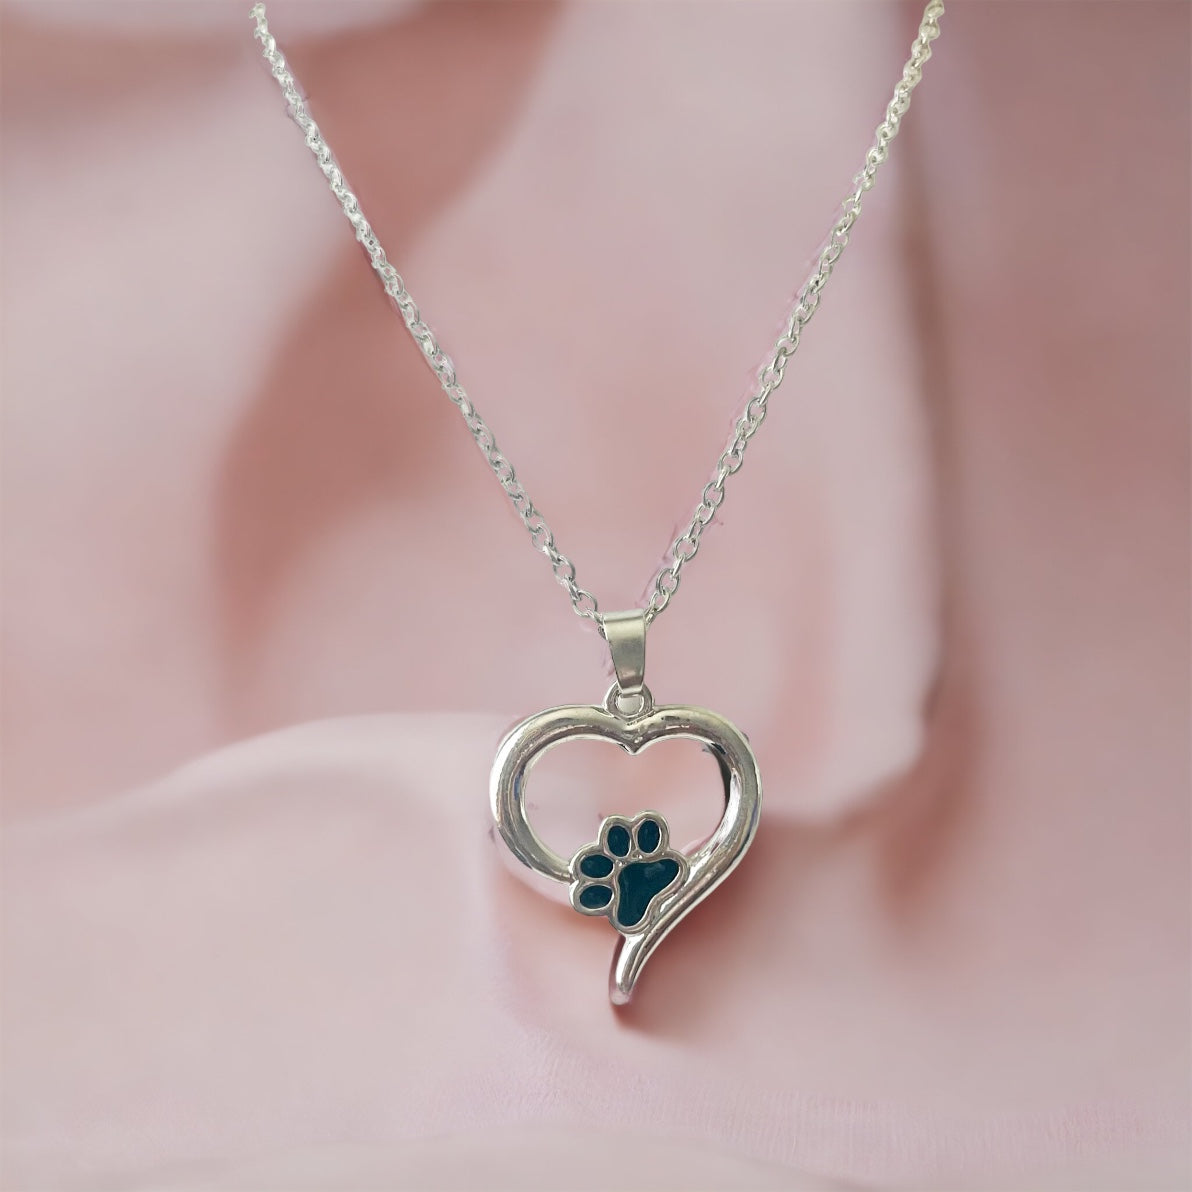 Paw and Heart Women Charm Necklace